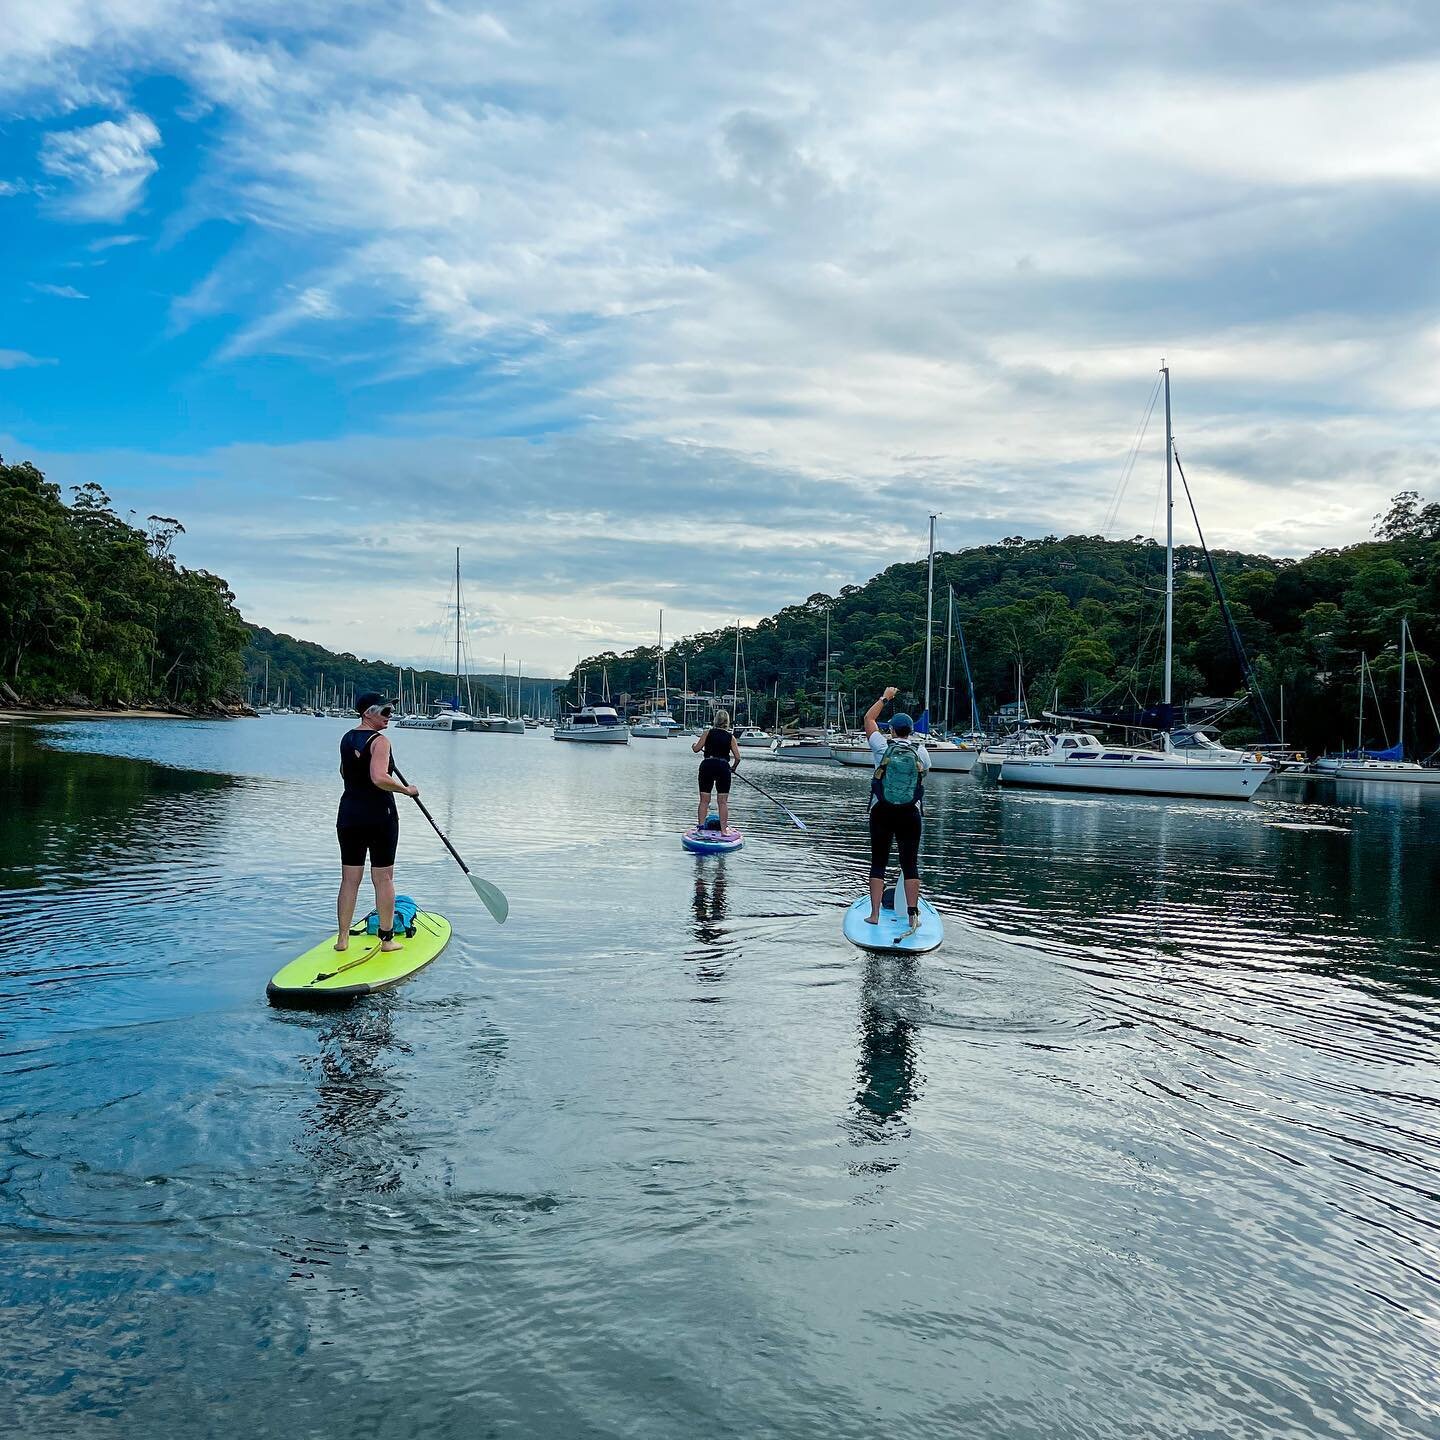 What a day!!!! 🤩🤩🤩 another amazing paddle with the @shesups_ crew! 🧡🧡🧡

Pittwater really put on a show! Sooo glassy 👌🏼👌🏼👌🏼